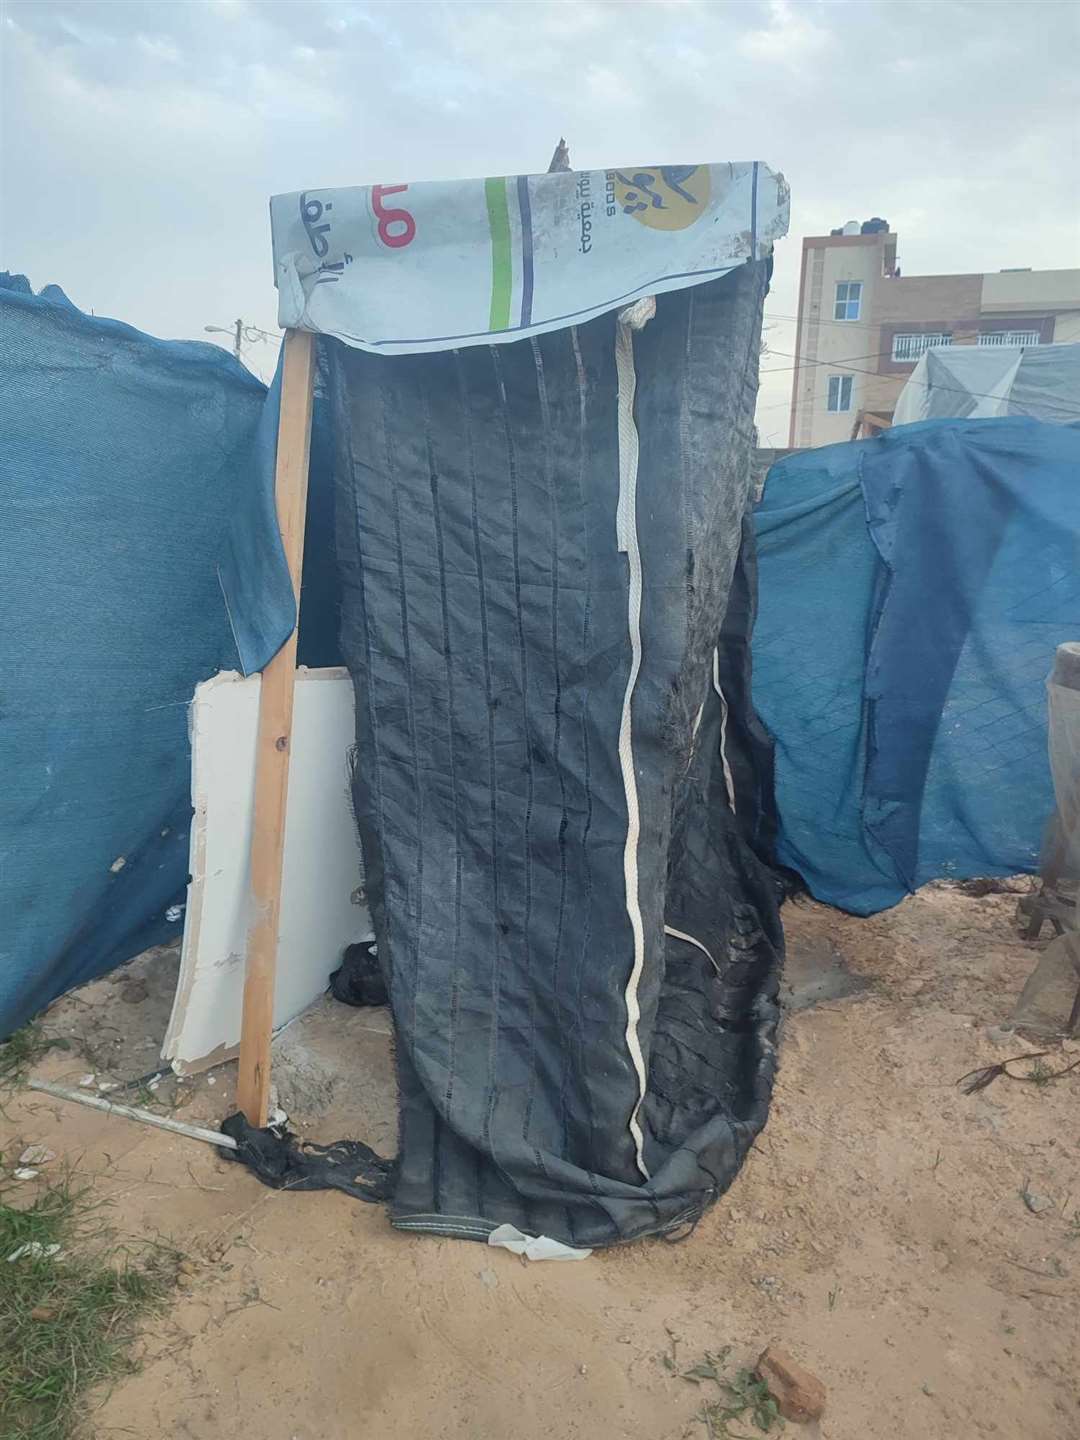 A hole in the ground shielded by tarpaulin serves as a toilet.